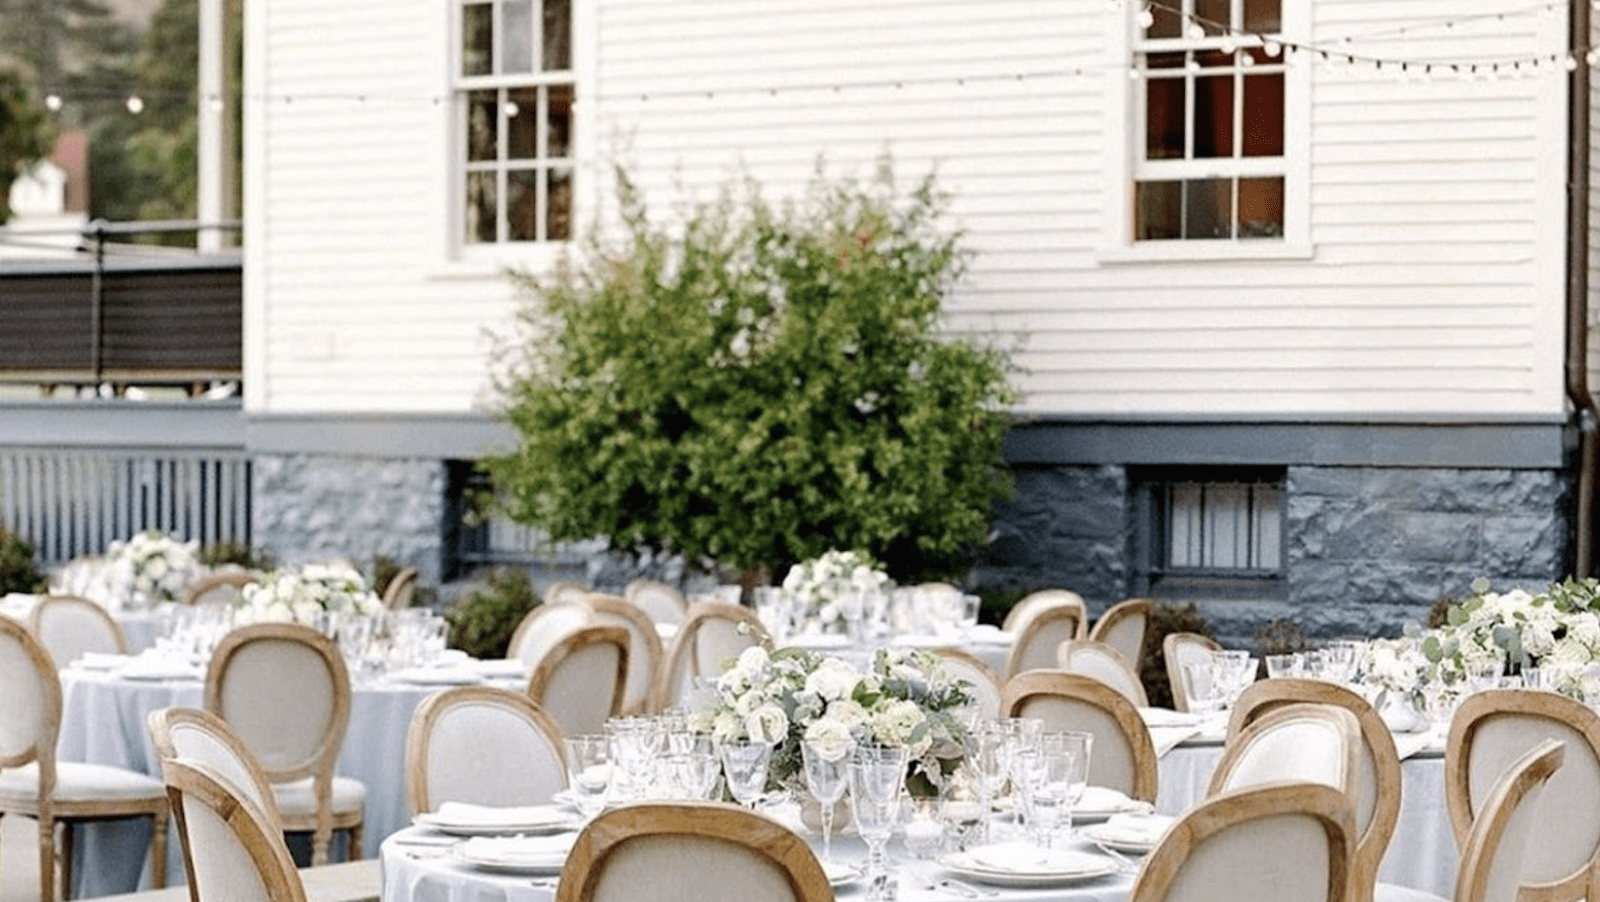 Cavallo-Point-Lodge_North-Bay_Private-Dining-Rooms_credit-@jennyschneiderevents_800x450.png